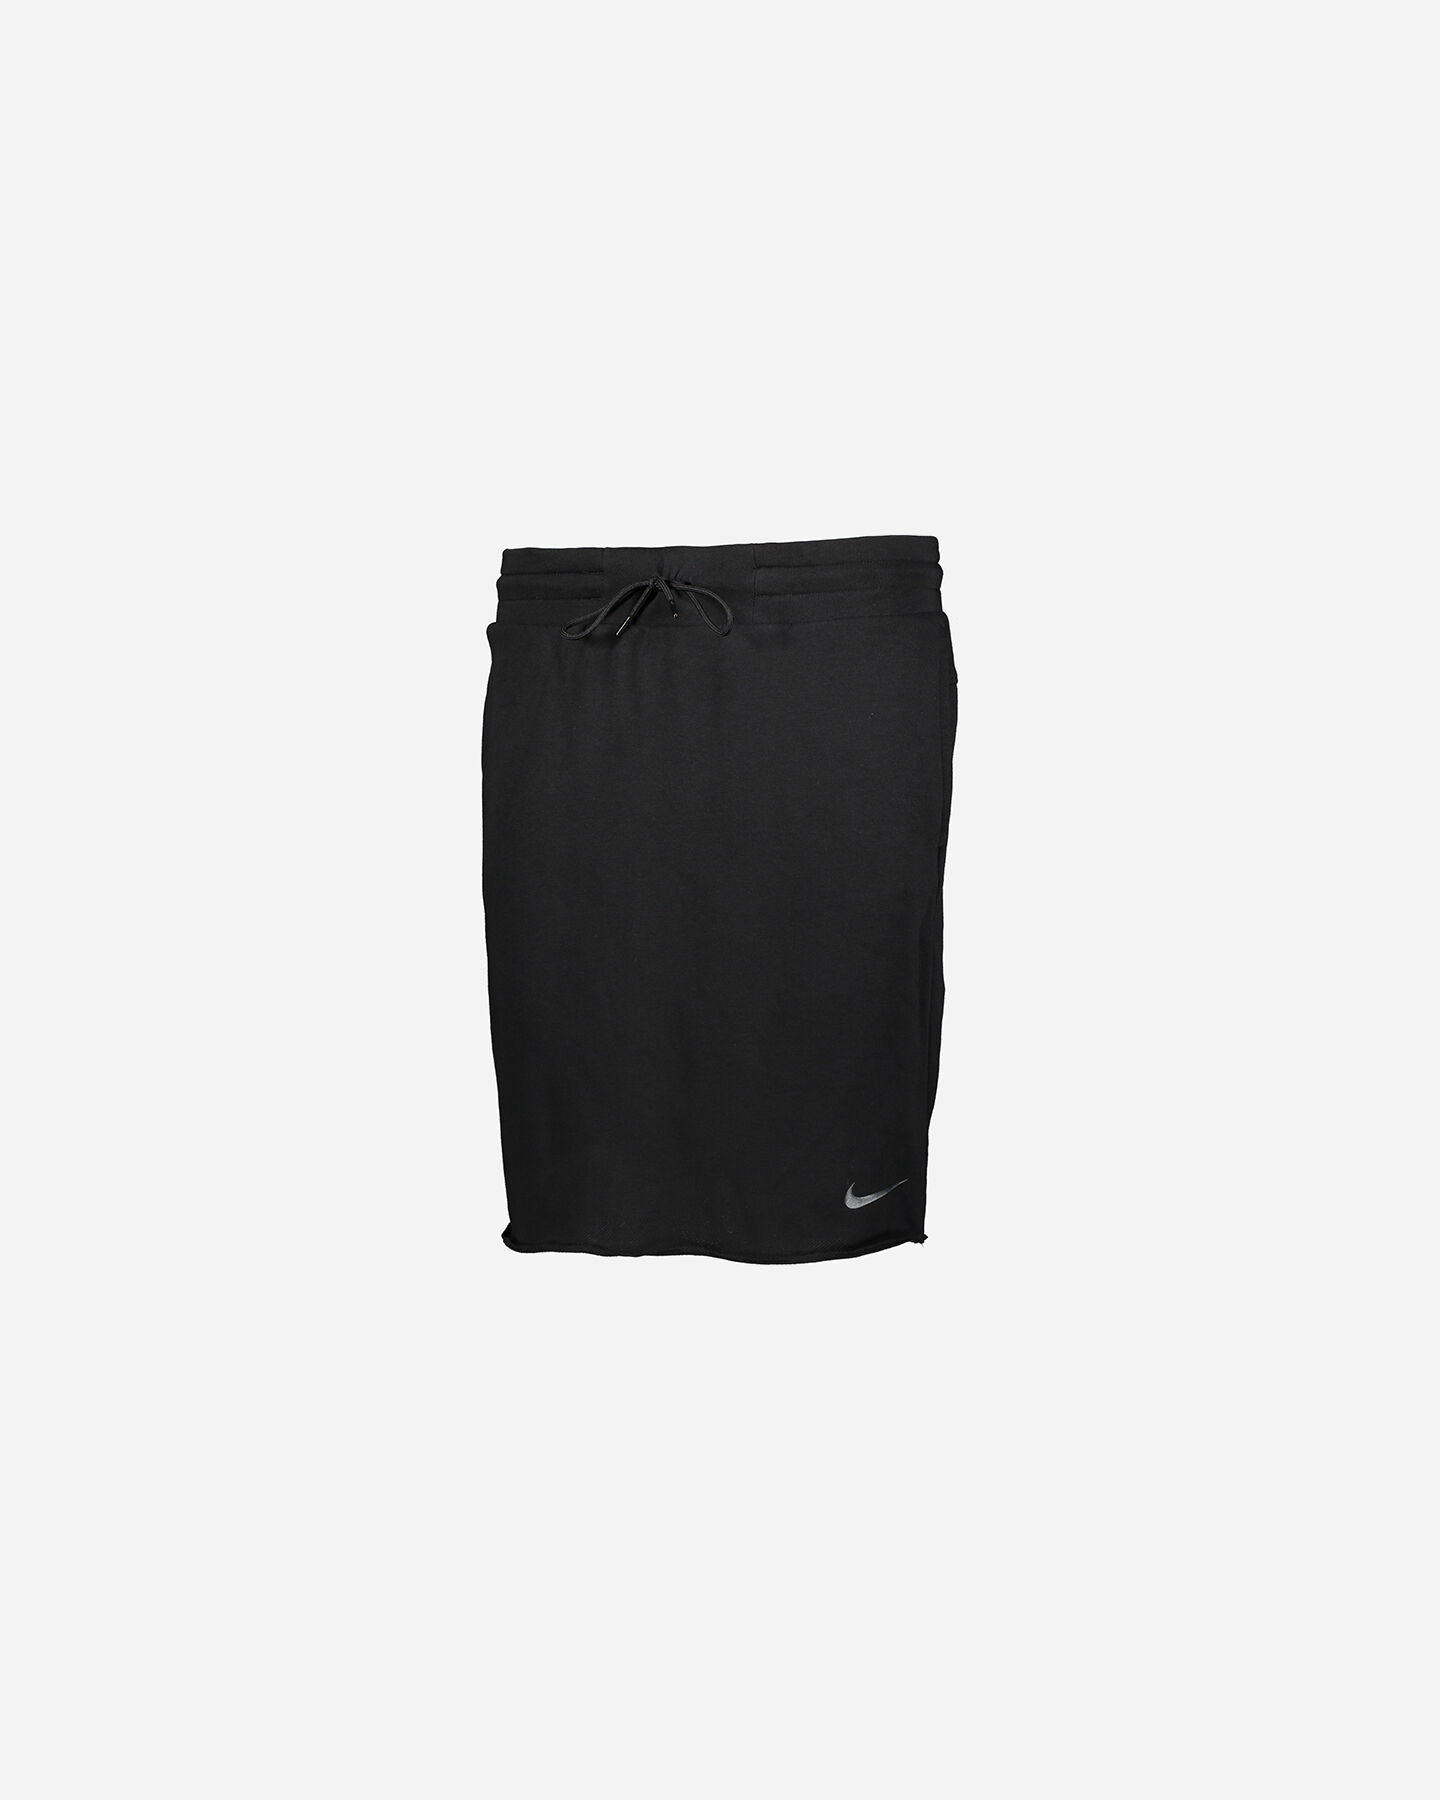  Pantalone NIKE COULISSE W S5299680|010|XS scatto 0